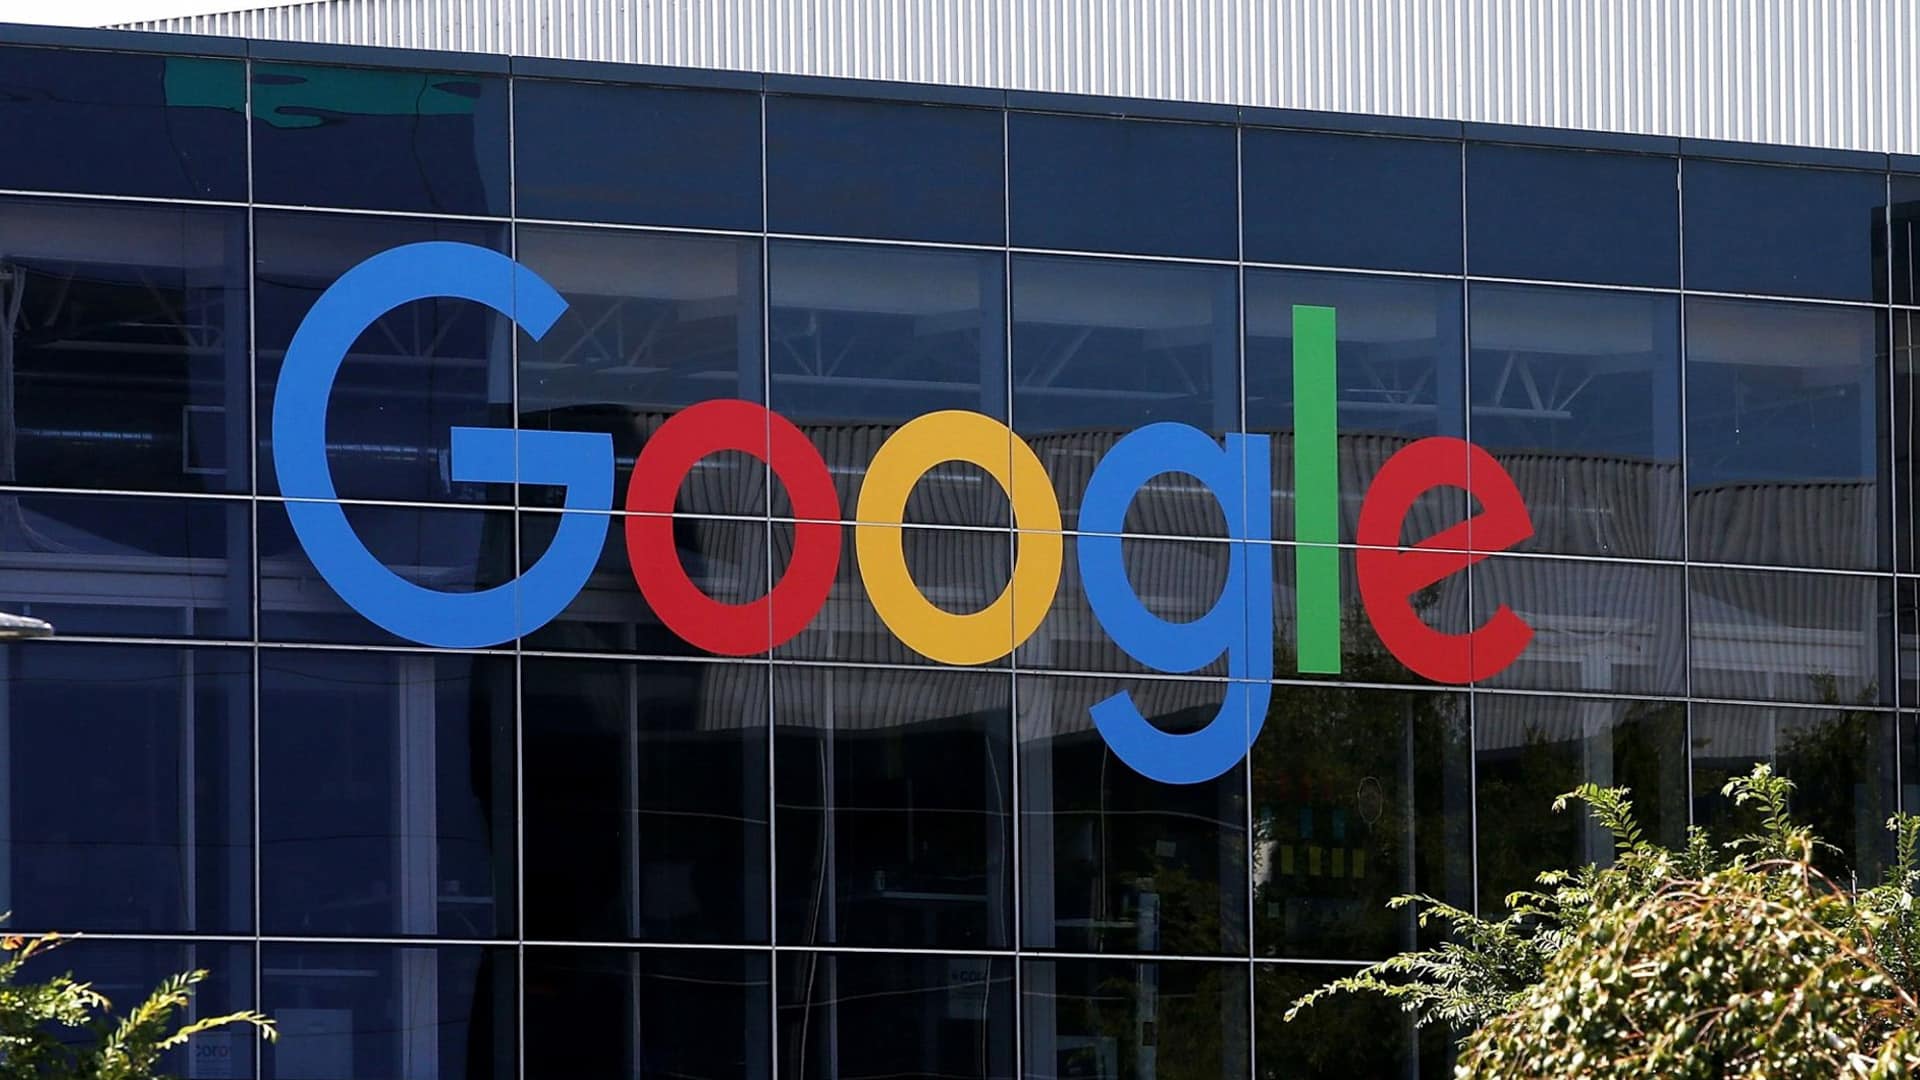 Remain committed to users, developers; evaluating next steps: Google on CCI's Rs 936 cr fine